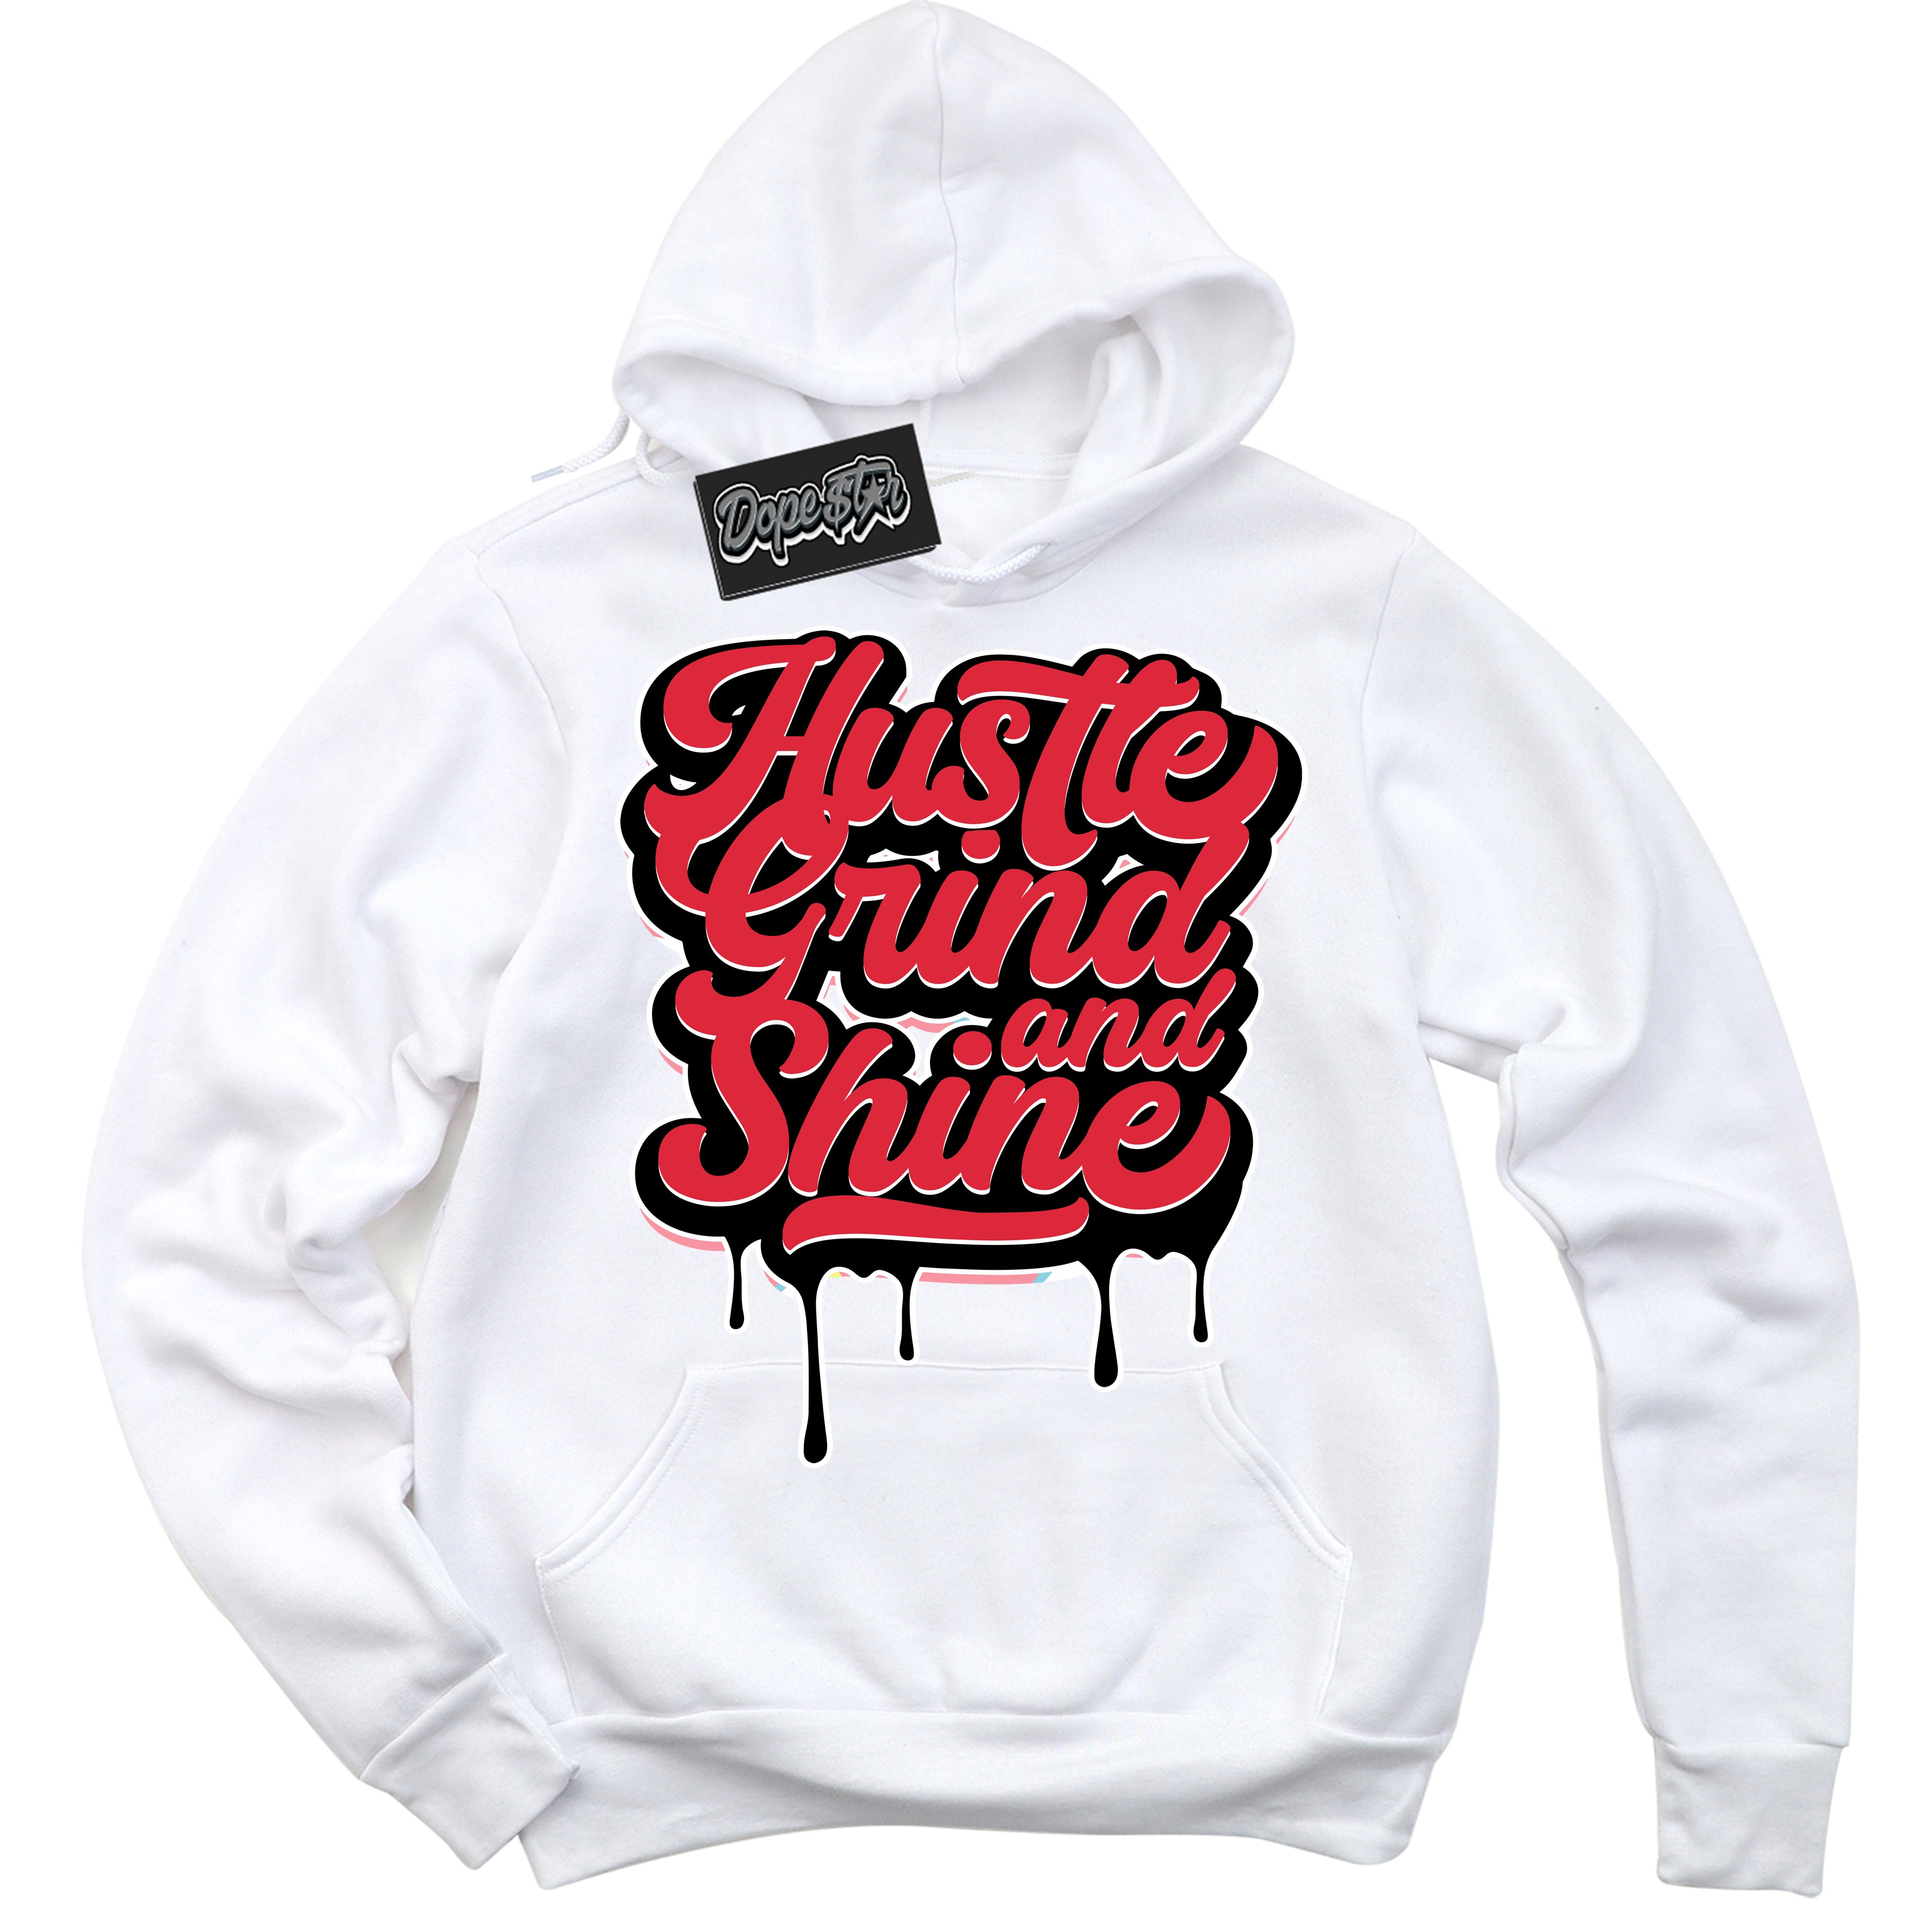 Cool White Graphic DopeStar Hoodie with “ Hustle Grind And Shine “ print, that perfectly matches Spider-Verse 1s sneakers